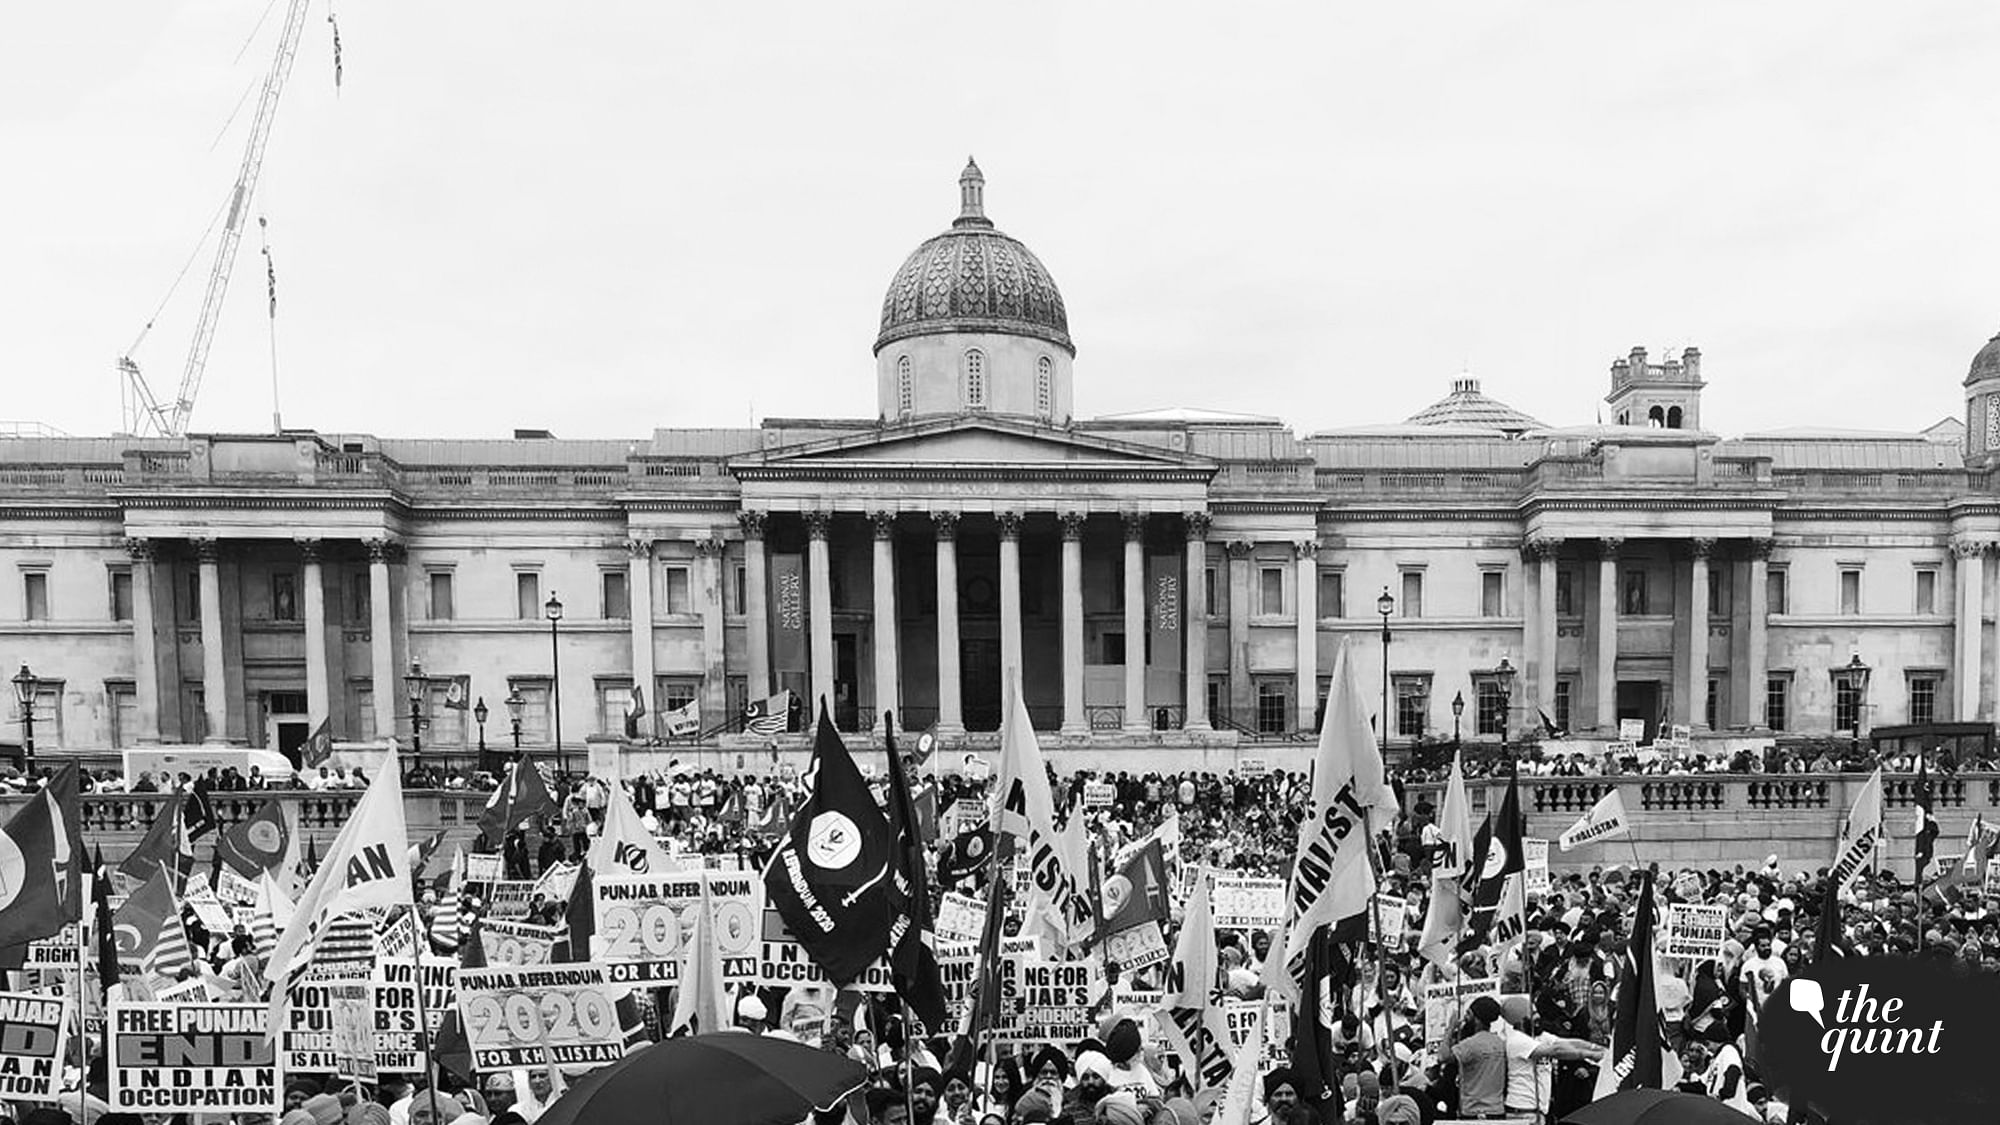 An image shared by the organisers of the ‘Referendum 2020’ rally, held in London on Sunday, 12 August.